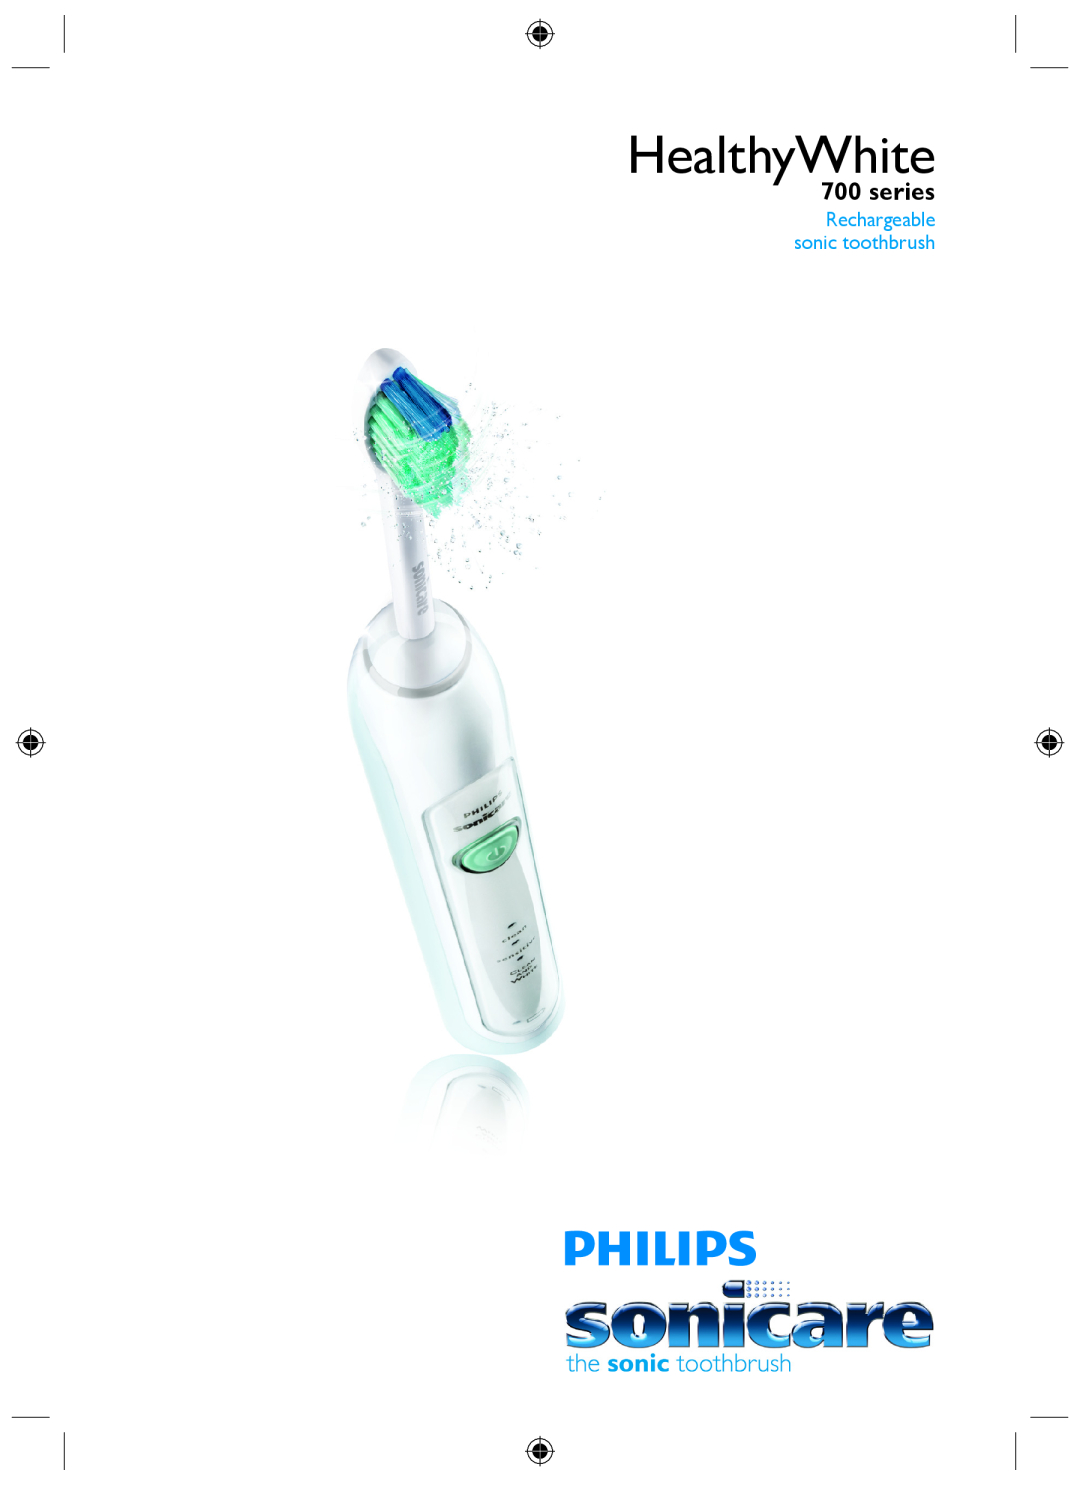 Philips HX6710 manual HealthyWhite, series, Rechargeable sonic toothbrush 